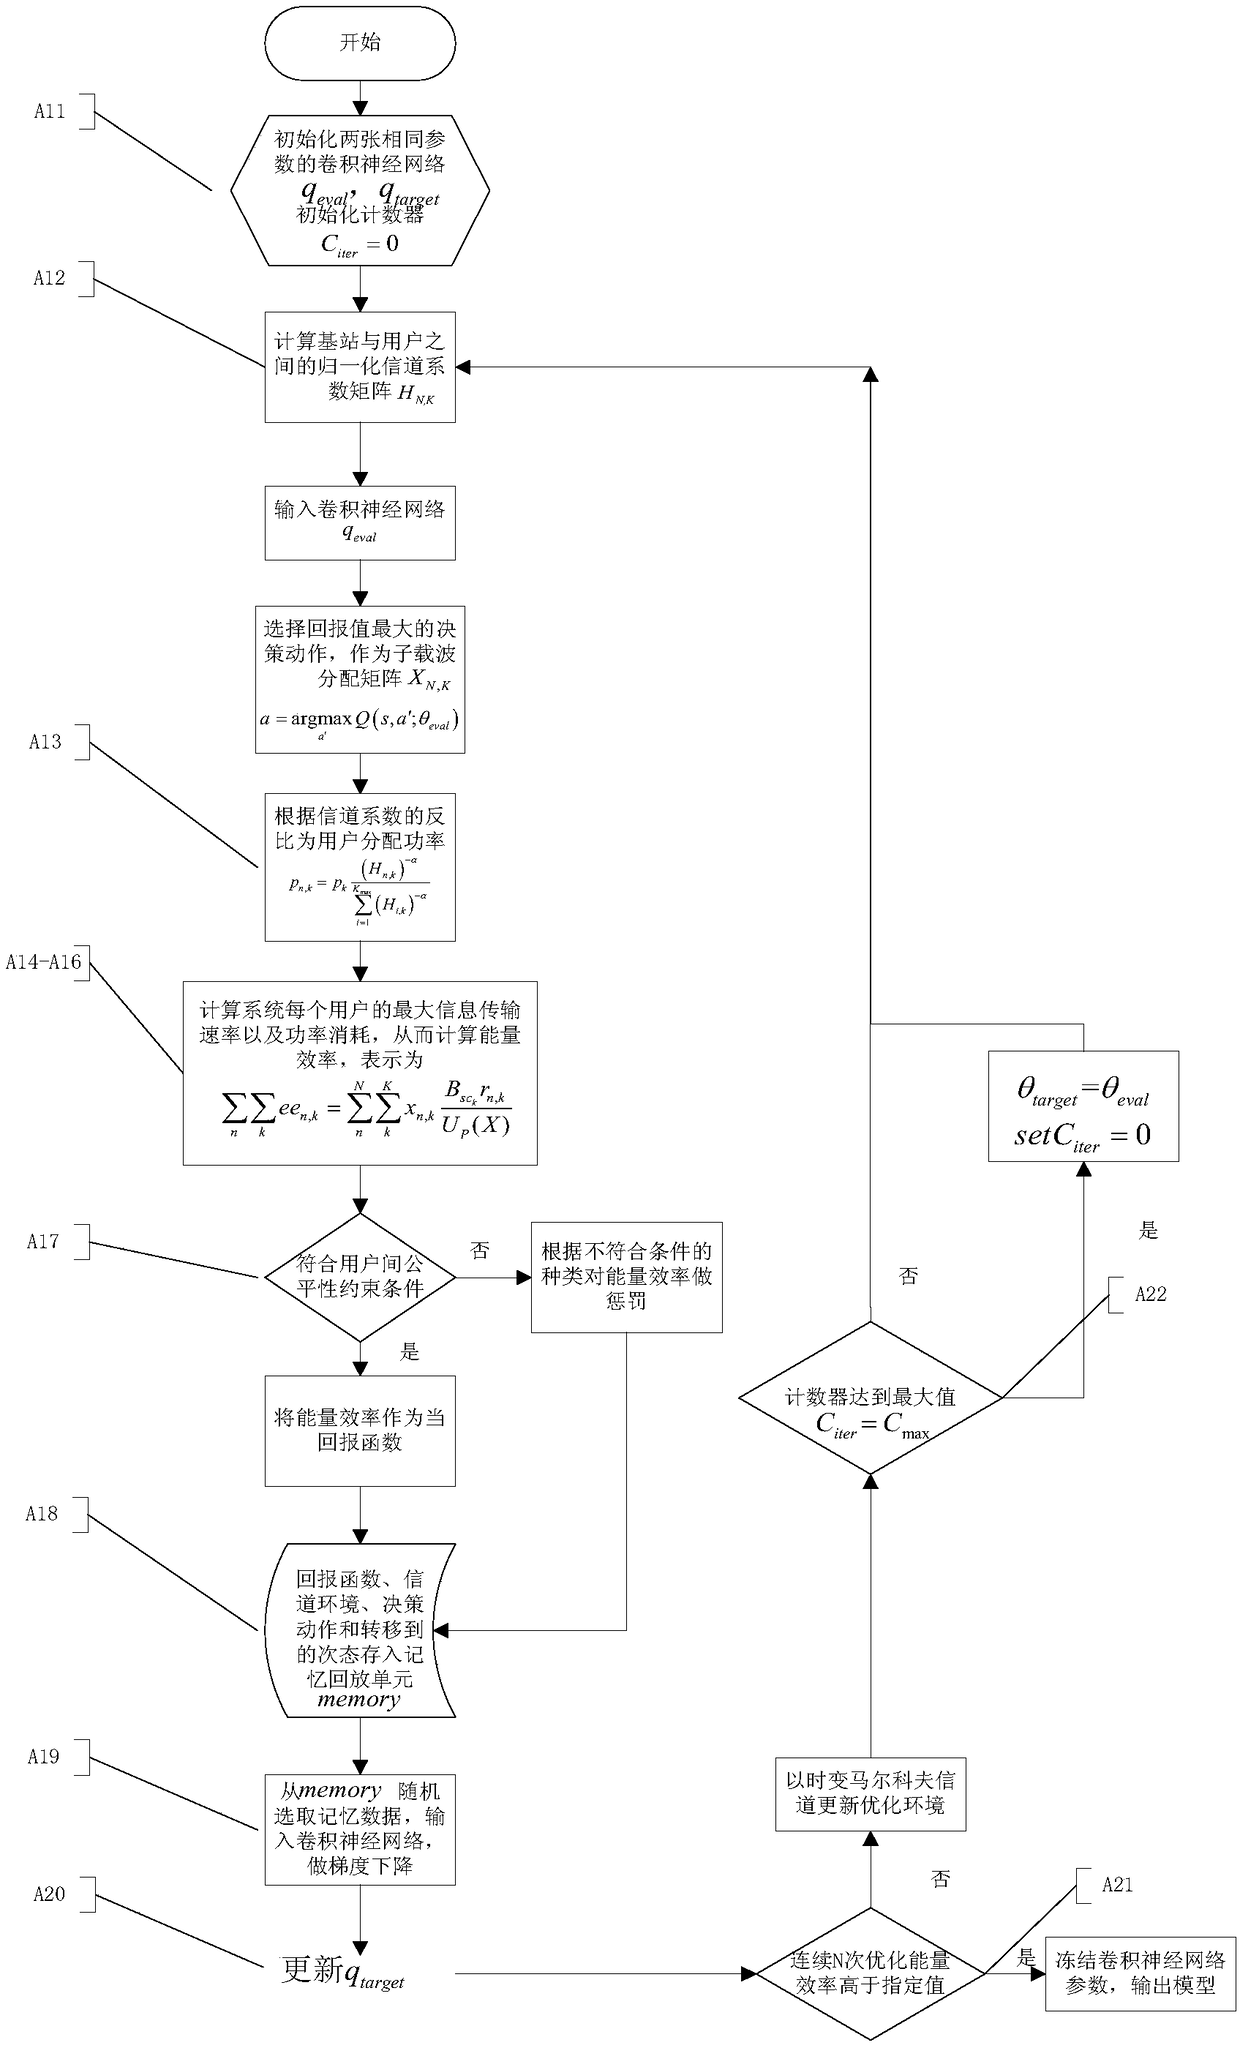 Wireless network resource allocation method based on deep reinforcement learning